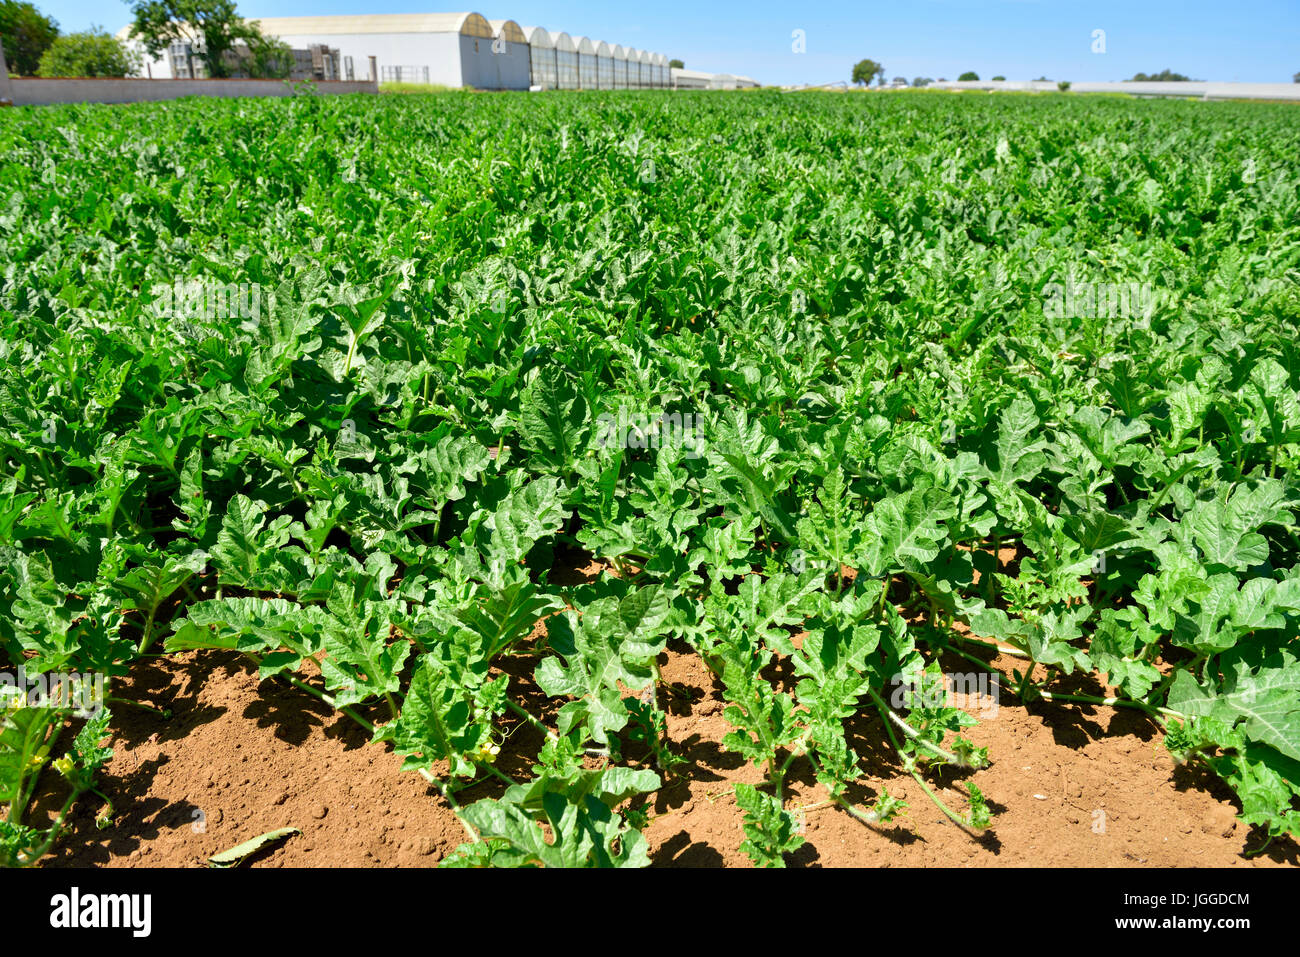 Young watermelon plants in field of commercial grower with greenhouses beyond, Province of Latina, Italy Stock Photo